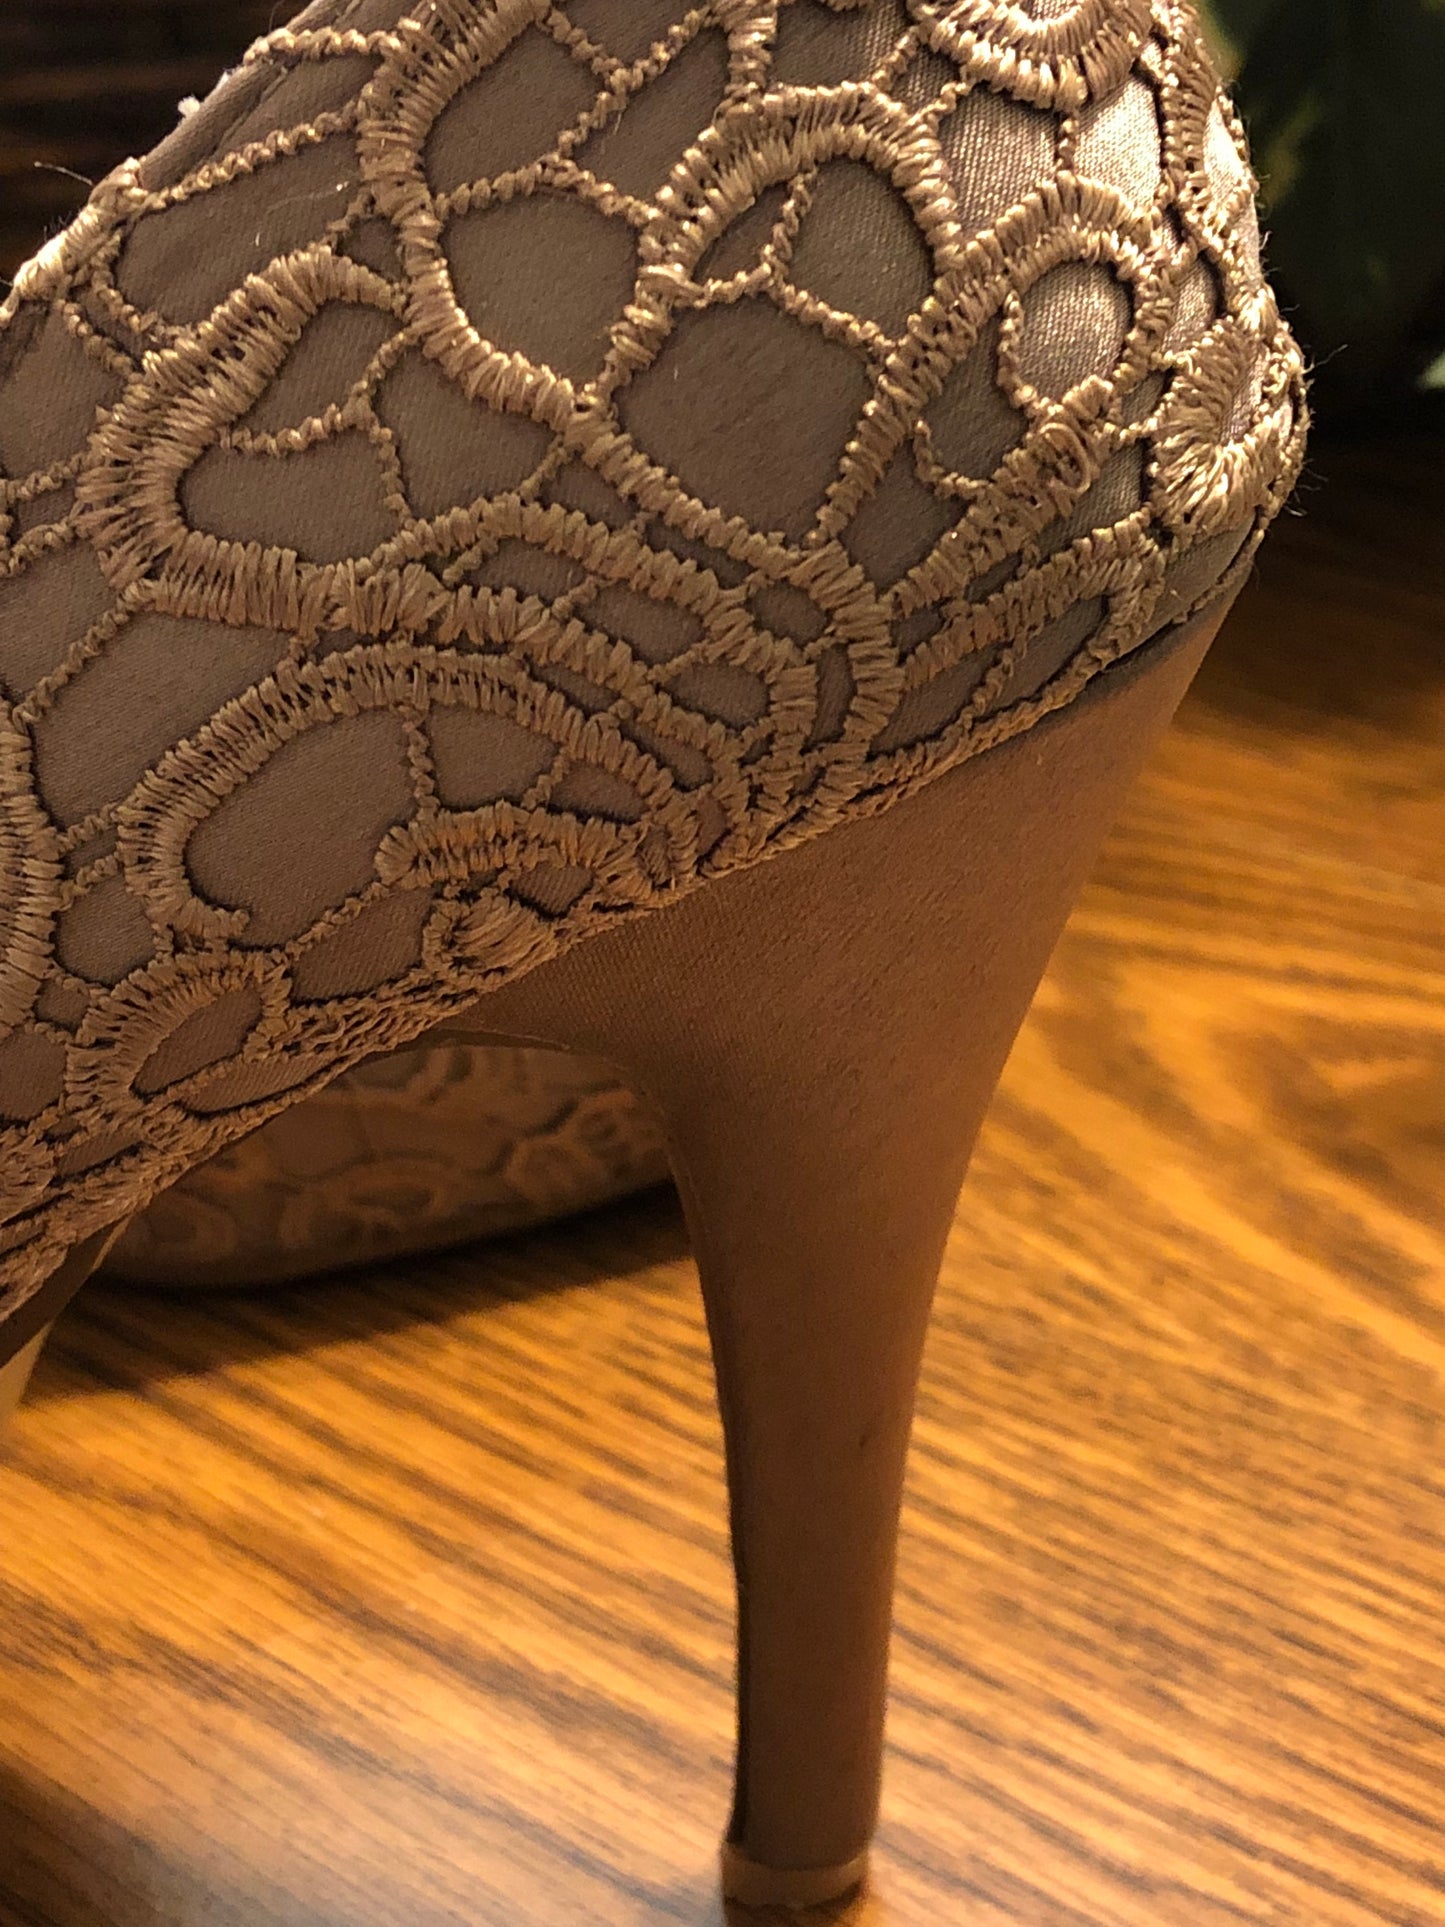 Gold Embroidered Heels from Paris, US Size 8 - Used